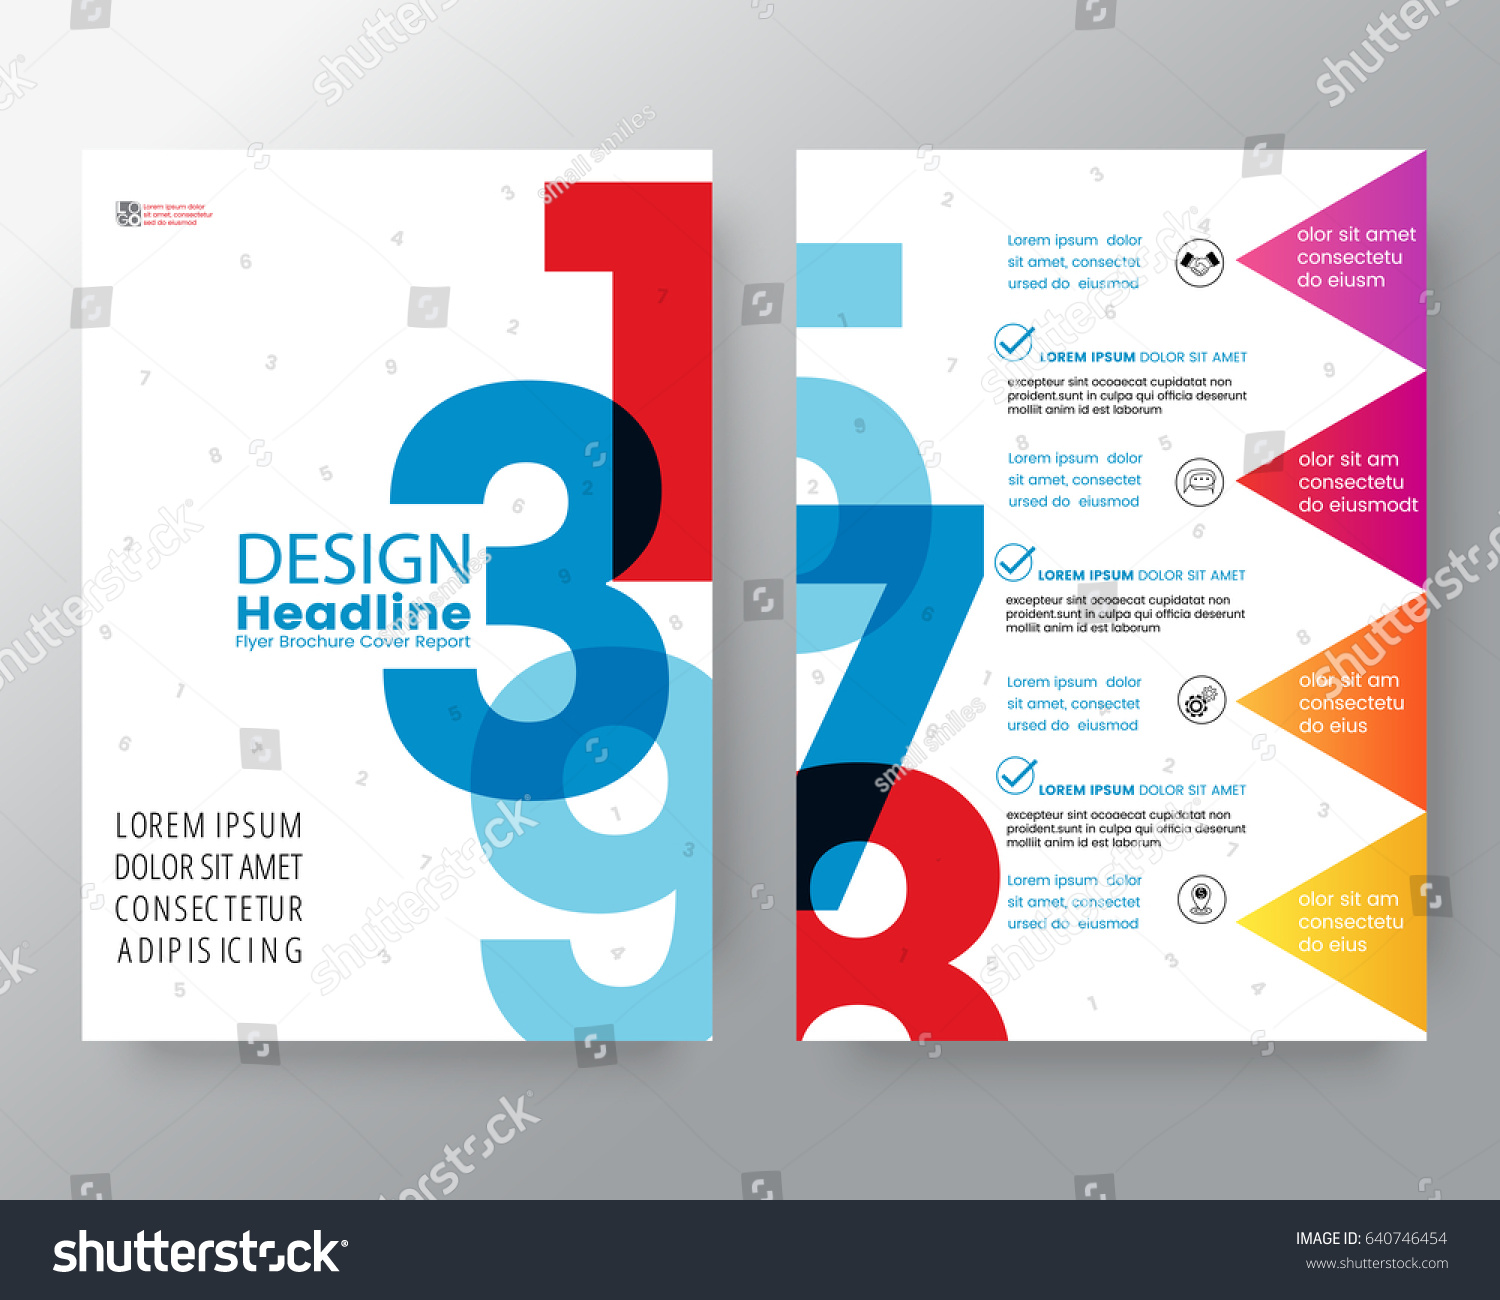 Business Templates Creative Design Abstract Swiss Stock Vector Royalty Free 640746454,Medical Tattoos Designs